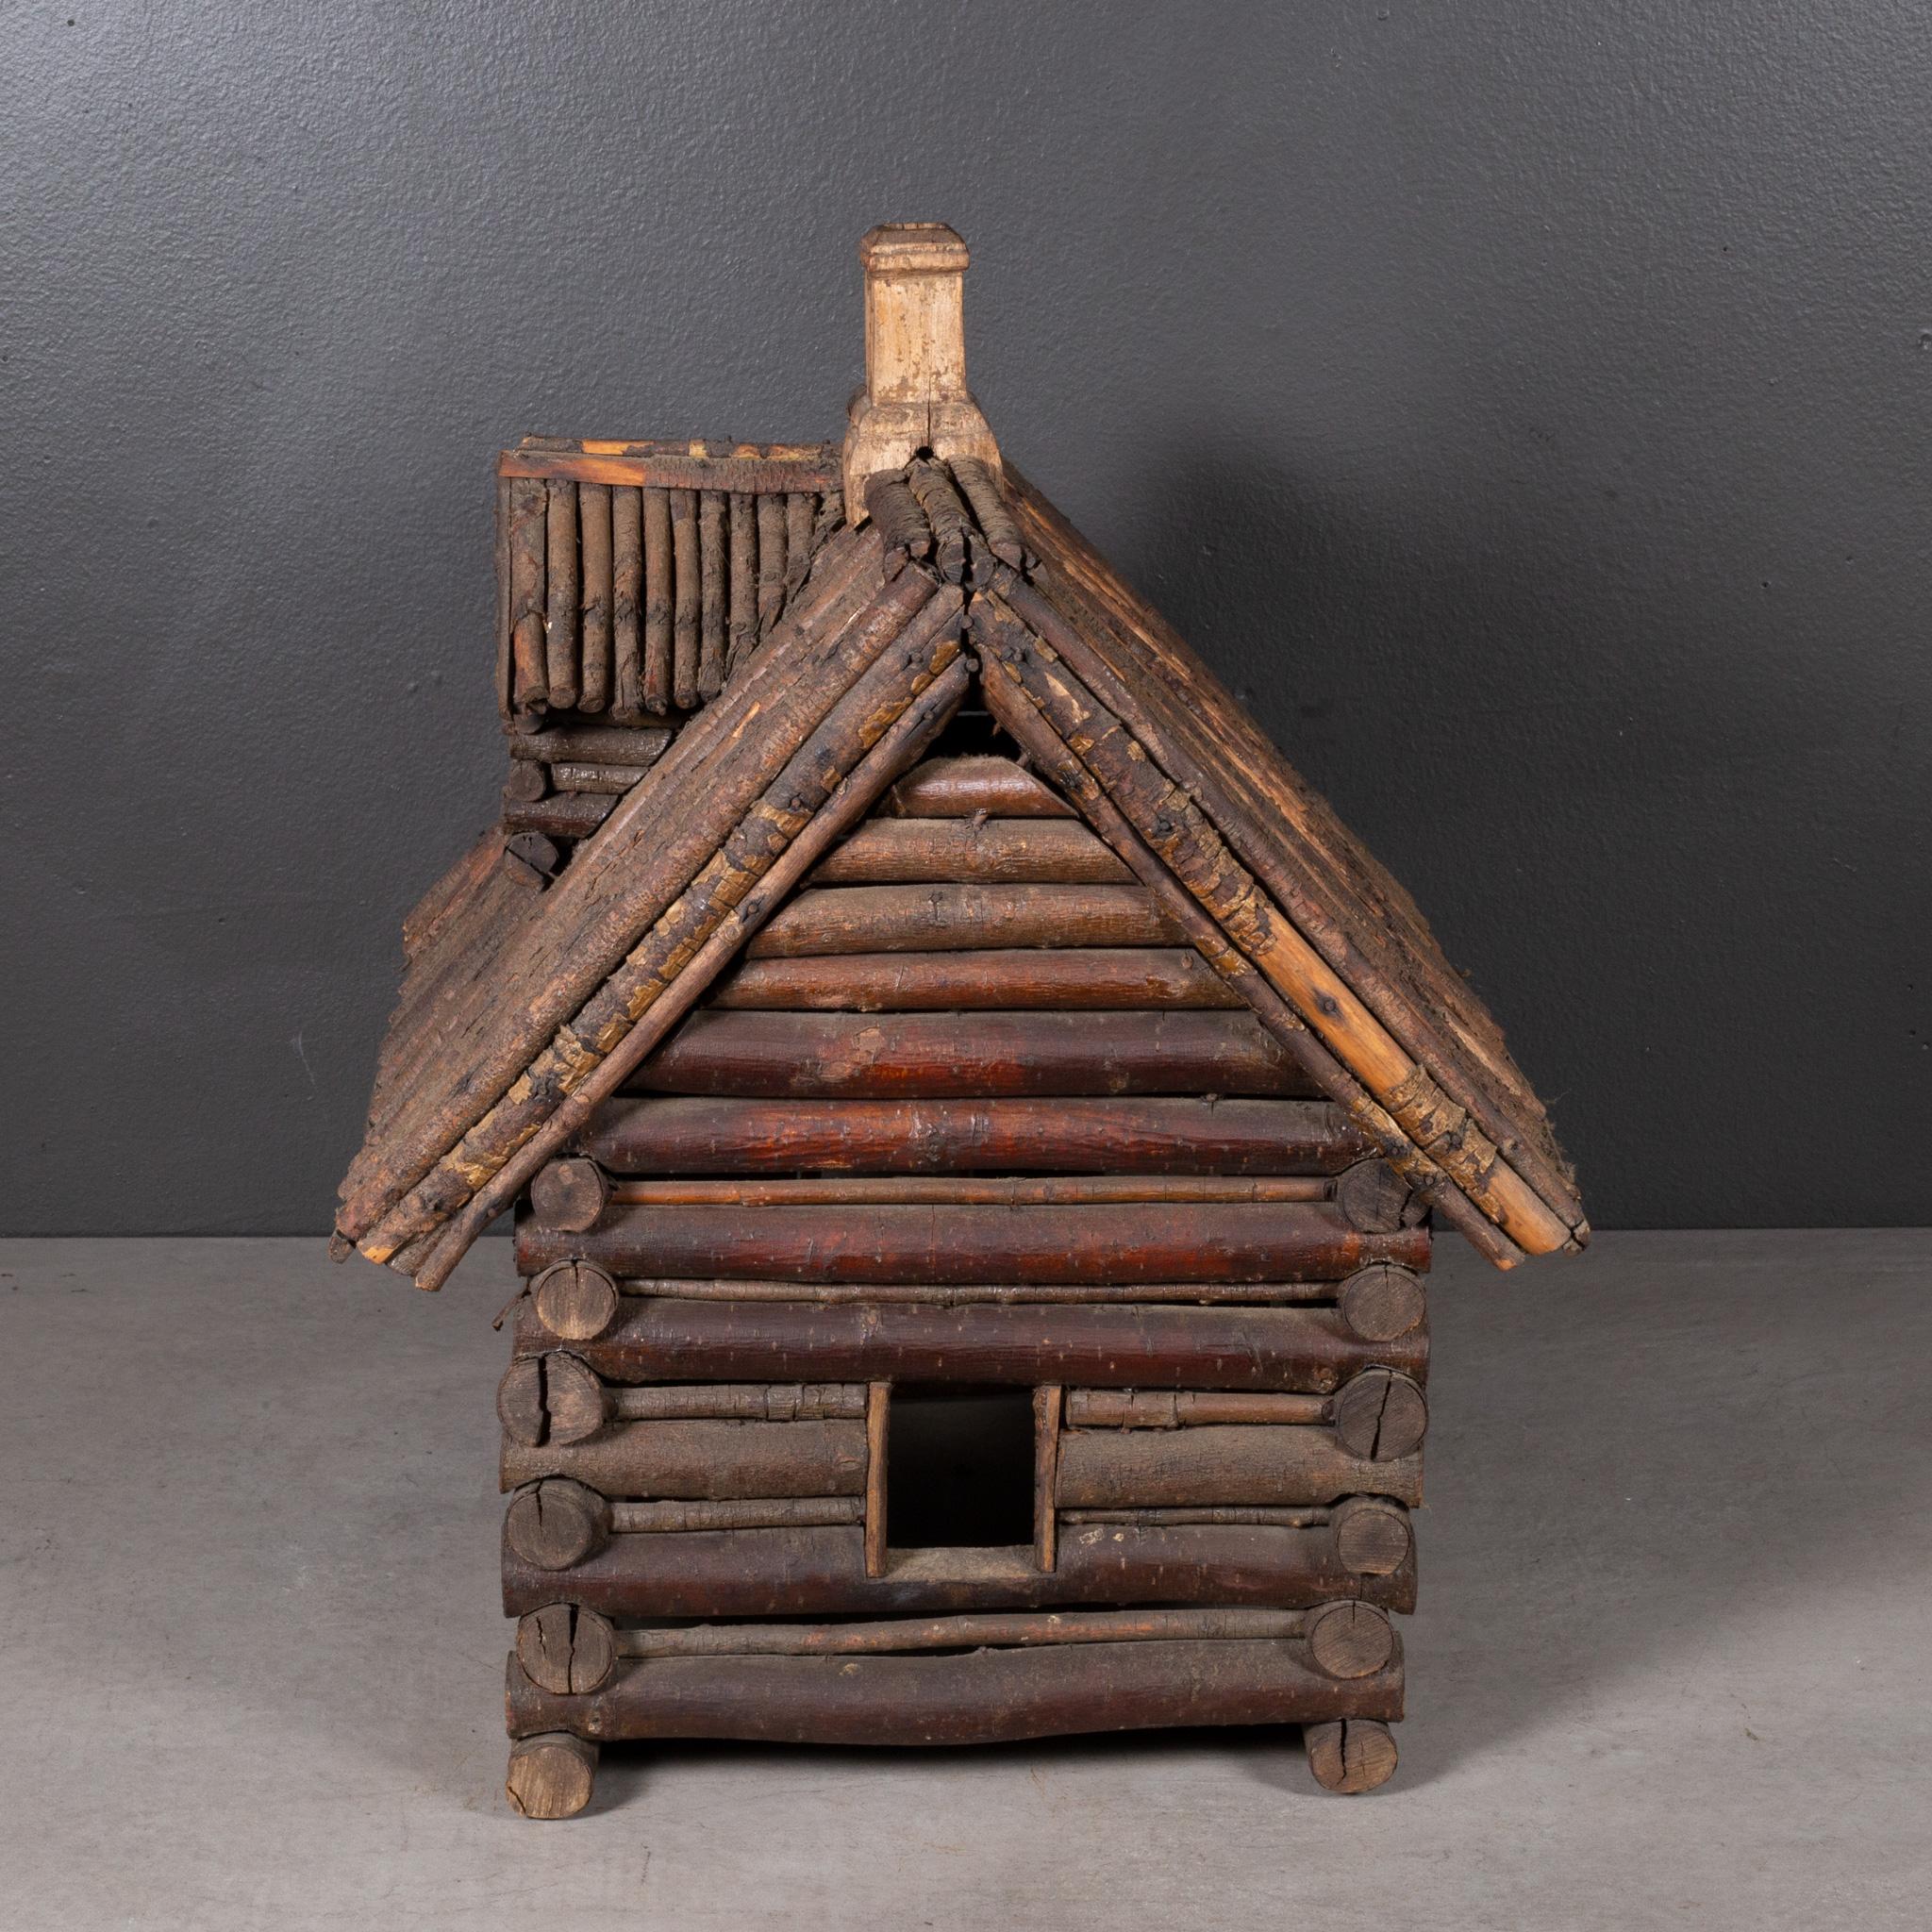 Early 20th c. Folk Art Log Cabin Model c.1900-1940 (FREE SHIPPING) In Good Condition For Sale In San Francisco, CA